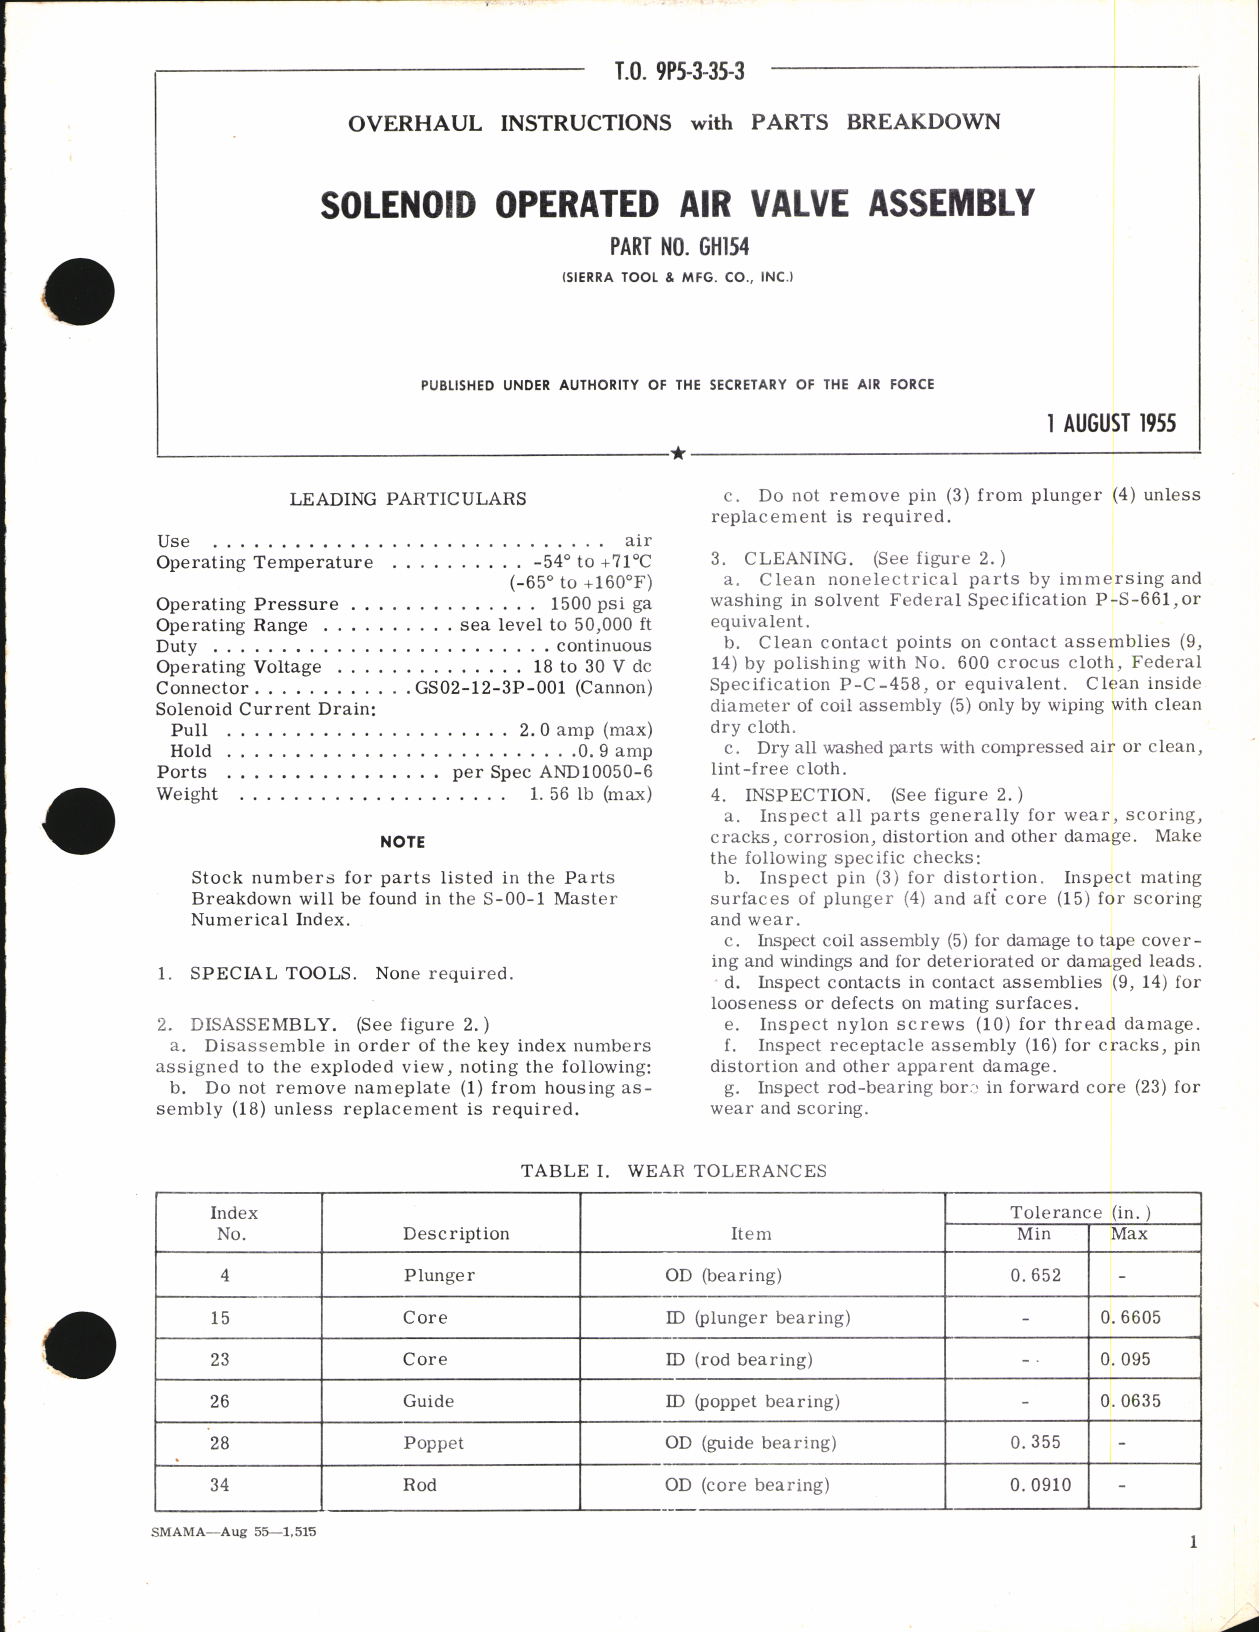 Sample page 1 from AirCorps Library document: Overhaul Instructions with Parts Breakdown for  Solenoid Operated Air Valve Assembly Part No. GH154 